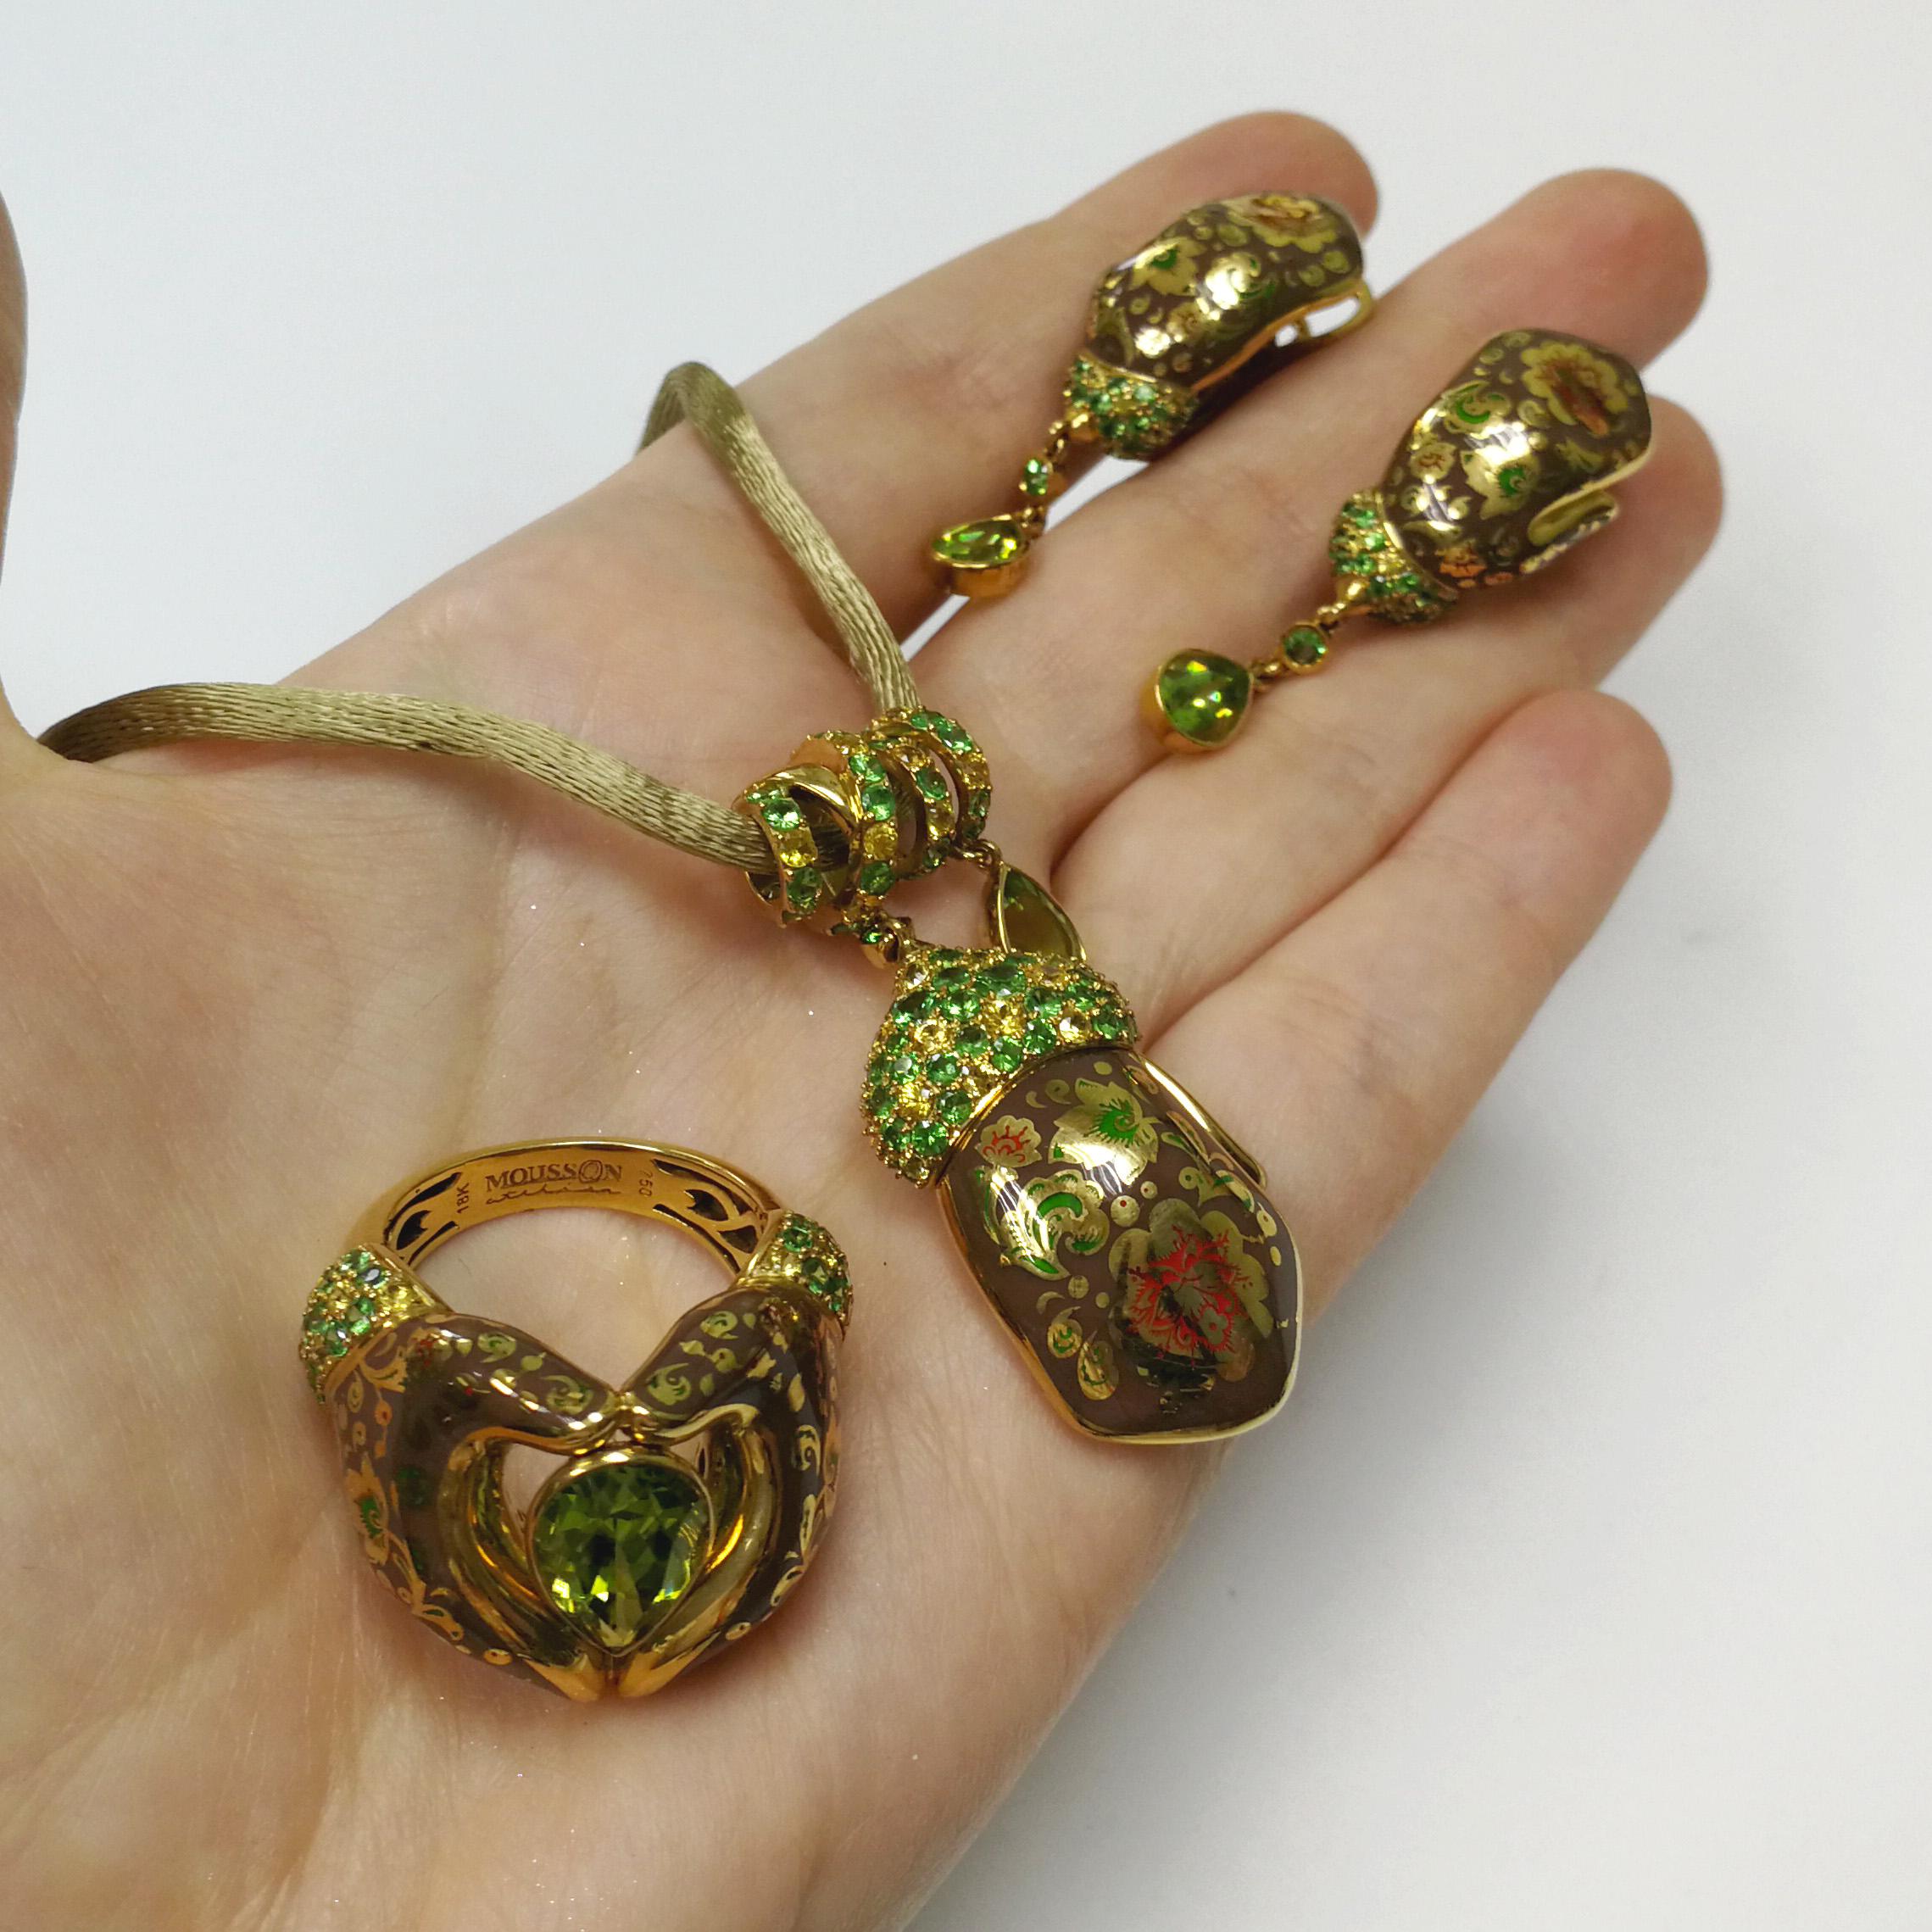 Peridot Tsavorite Sapphire 18 Karat Yellow Gold Mitten Suite
Russian winter is known to the whole world. So that hands do not freeze, long time ago people came up with wearing mittens. It was decorated with various Russian folk patterns and